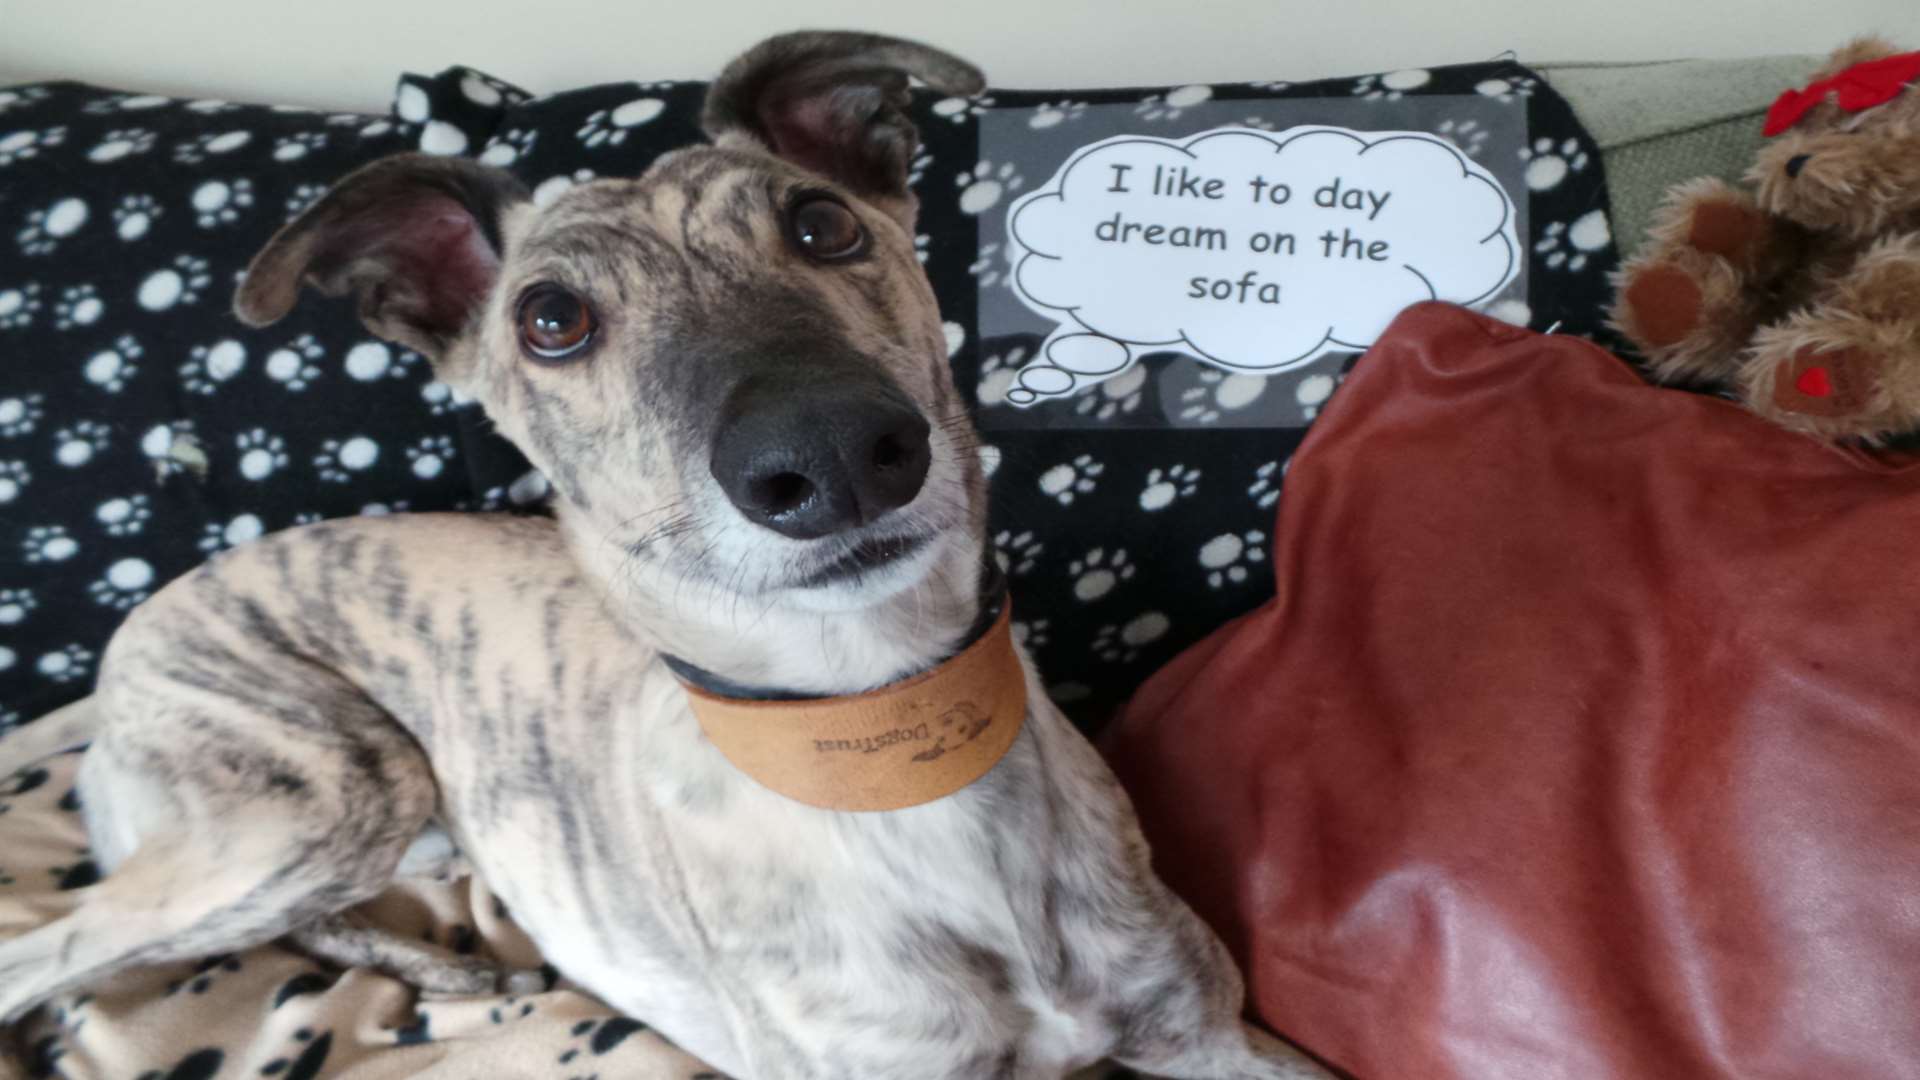 Centre bosses have launched an appeal to find a home for the sighthounds